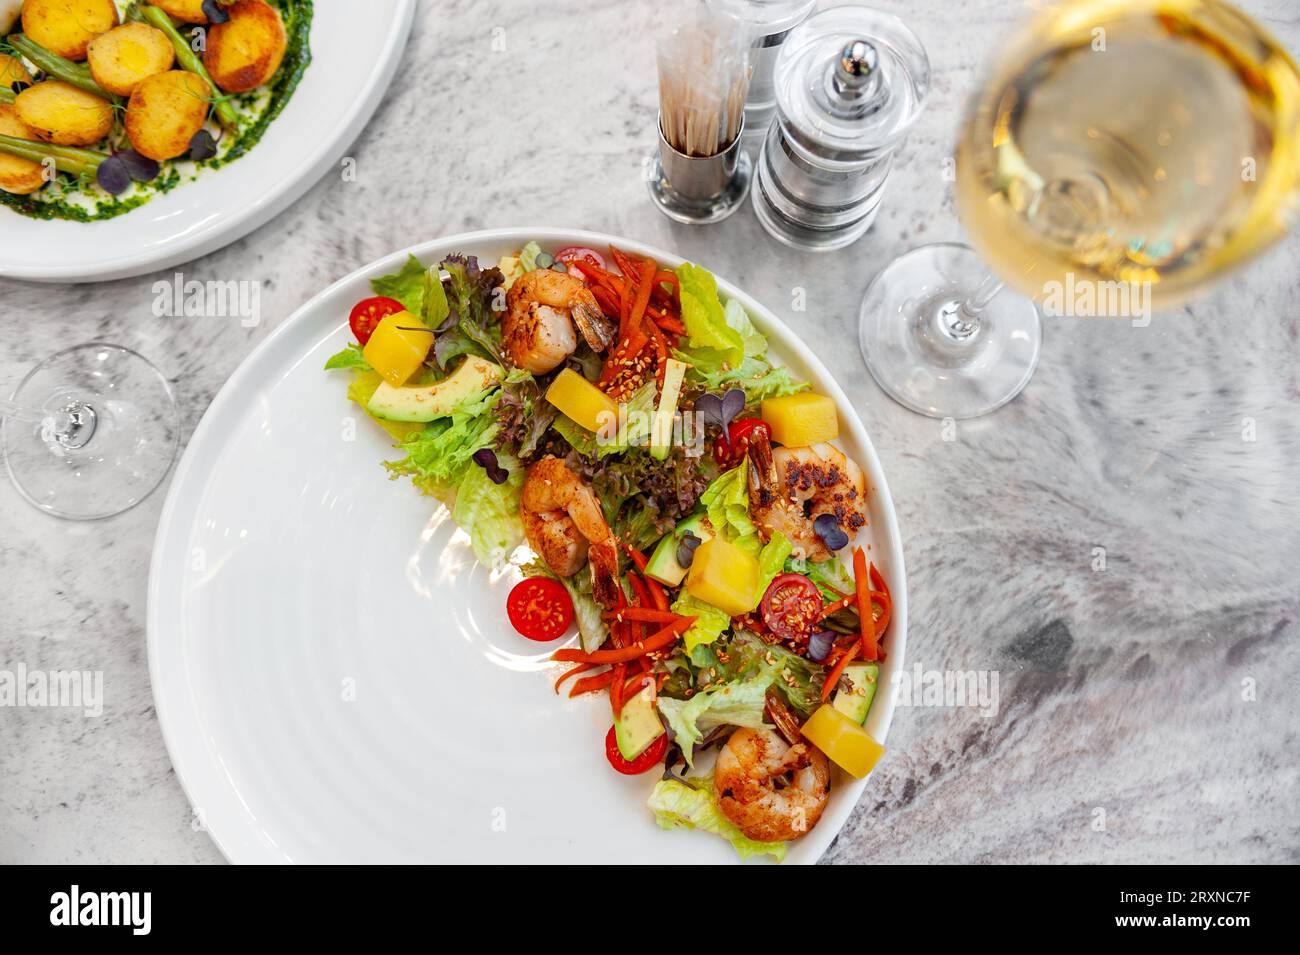 Salad with fried shrimp, mango, avocado and cherry tomatoes on a white plate. High quality photo Stock Photo